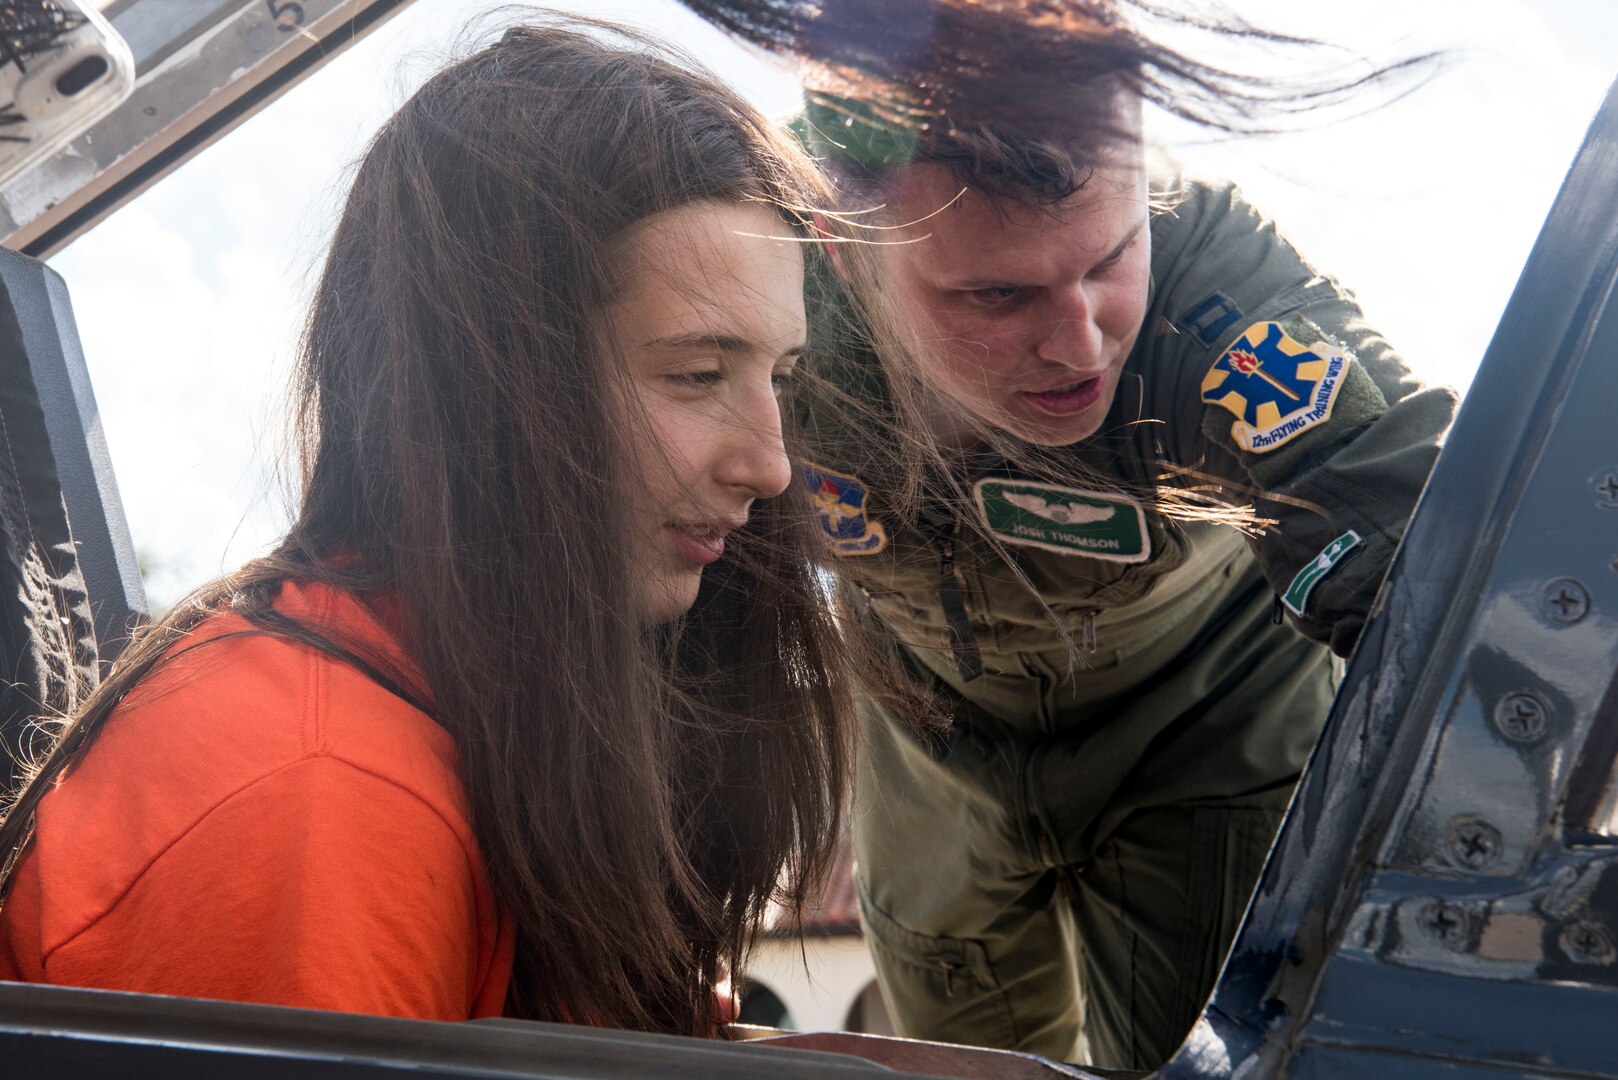 Charlotte Elmore, University of Texas San Antonio Women’s Basketball Team player, sits in the cockpit of a T-38C Talon while Capt. Josh Thompson, 560th Flying Training Squadron instructor pilot, explains the controls Sept. 25, 2018, at Joint Base San Antonio-Randolph, Texas. The T-38C Talon is a twin-engine, high-altitude, supersonic jet trainer used in a variety of roles because of its design, economy of operations, ease of maintenance, high performance and exceptional safety record. (U.S. Air Force photo by Senior Airman Stormy Archer)